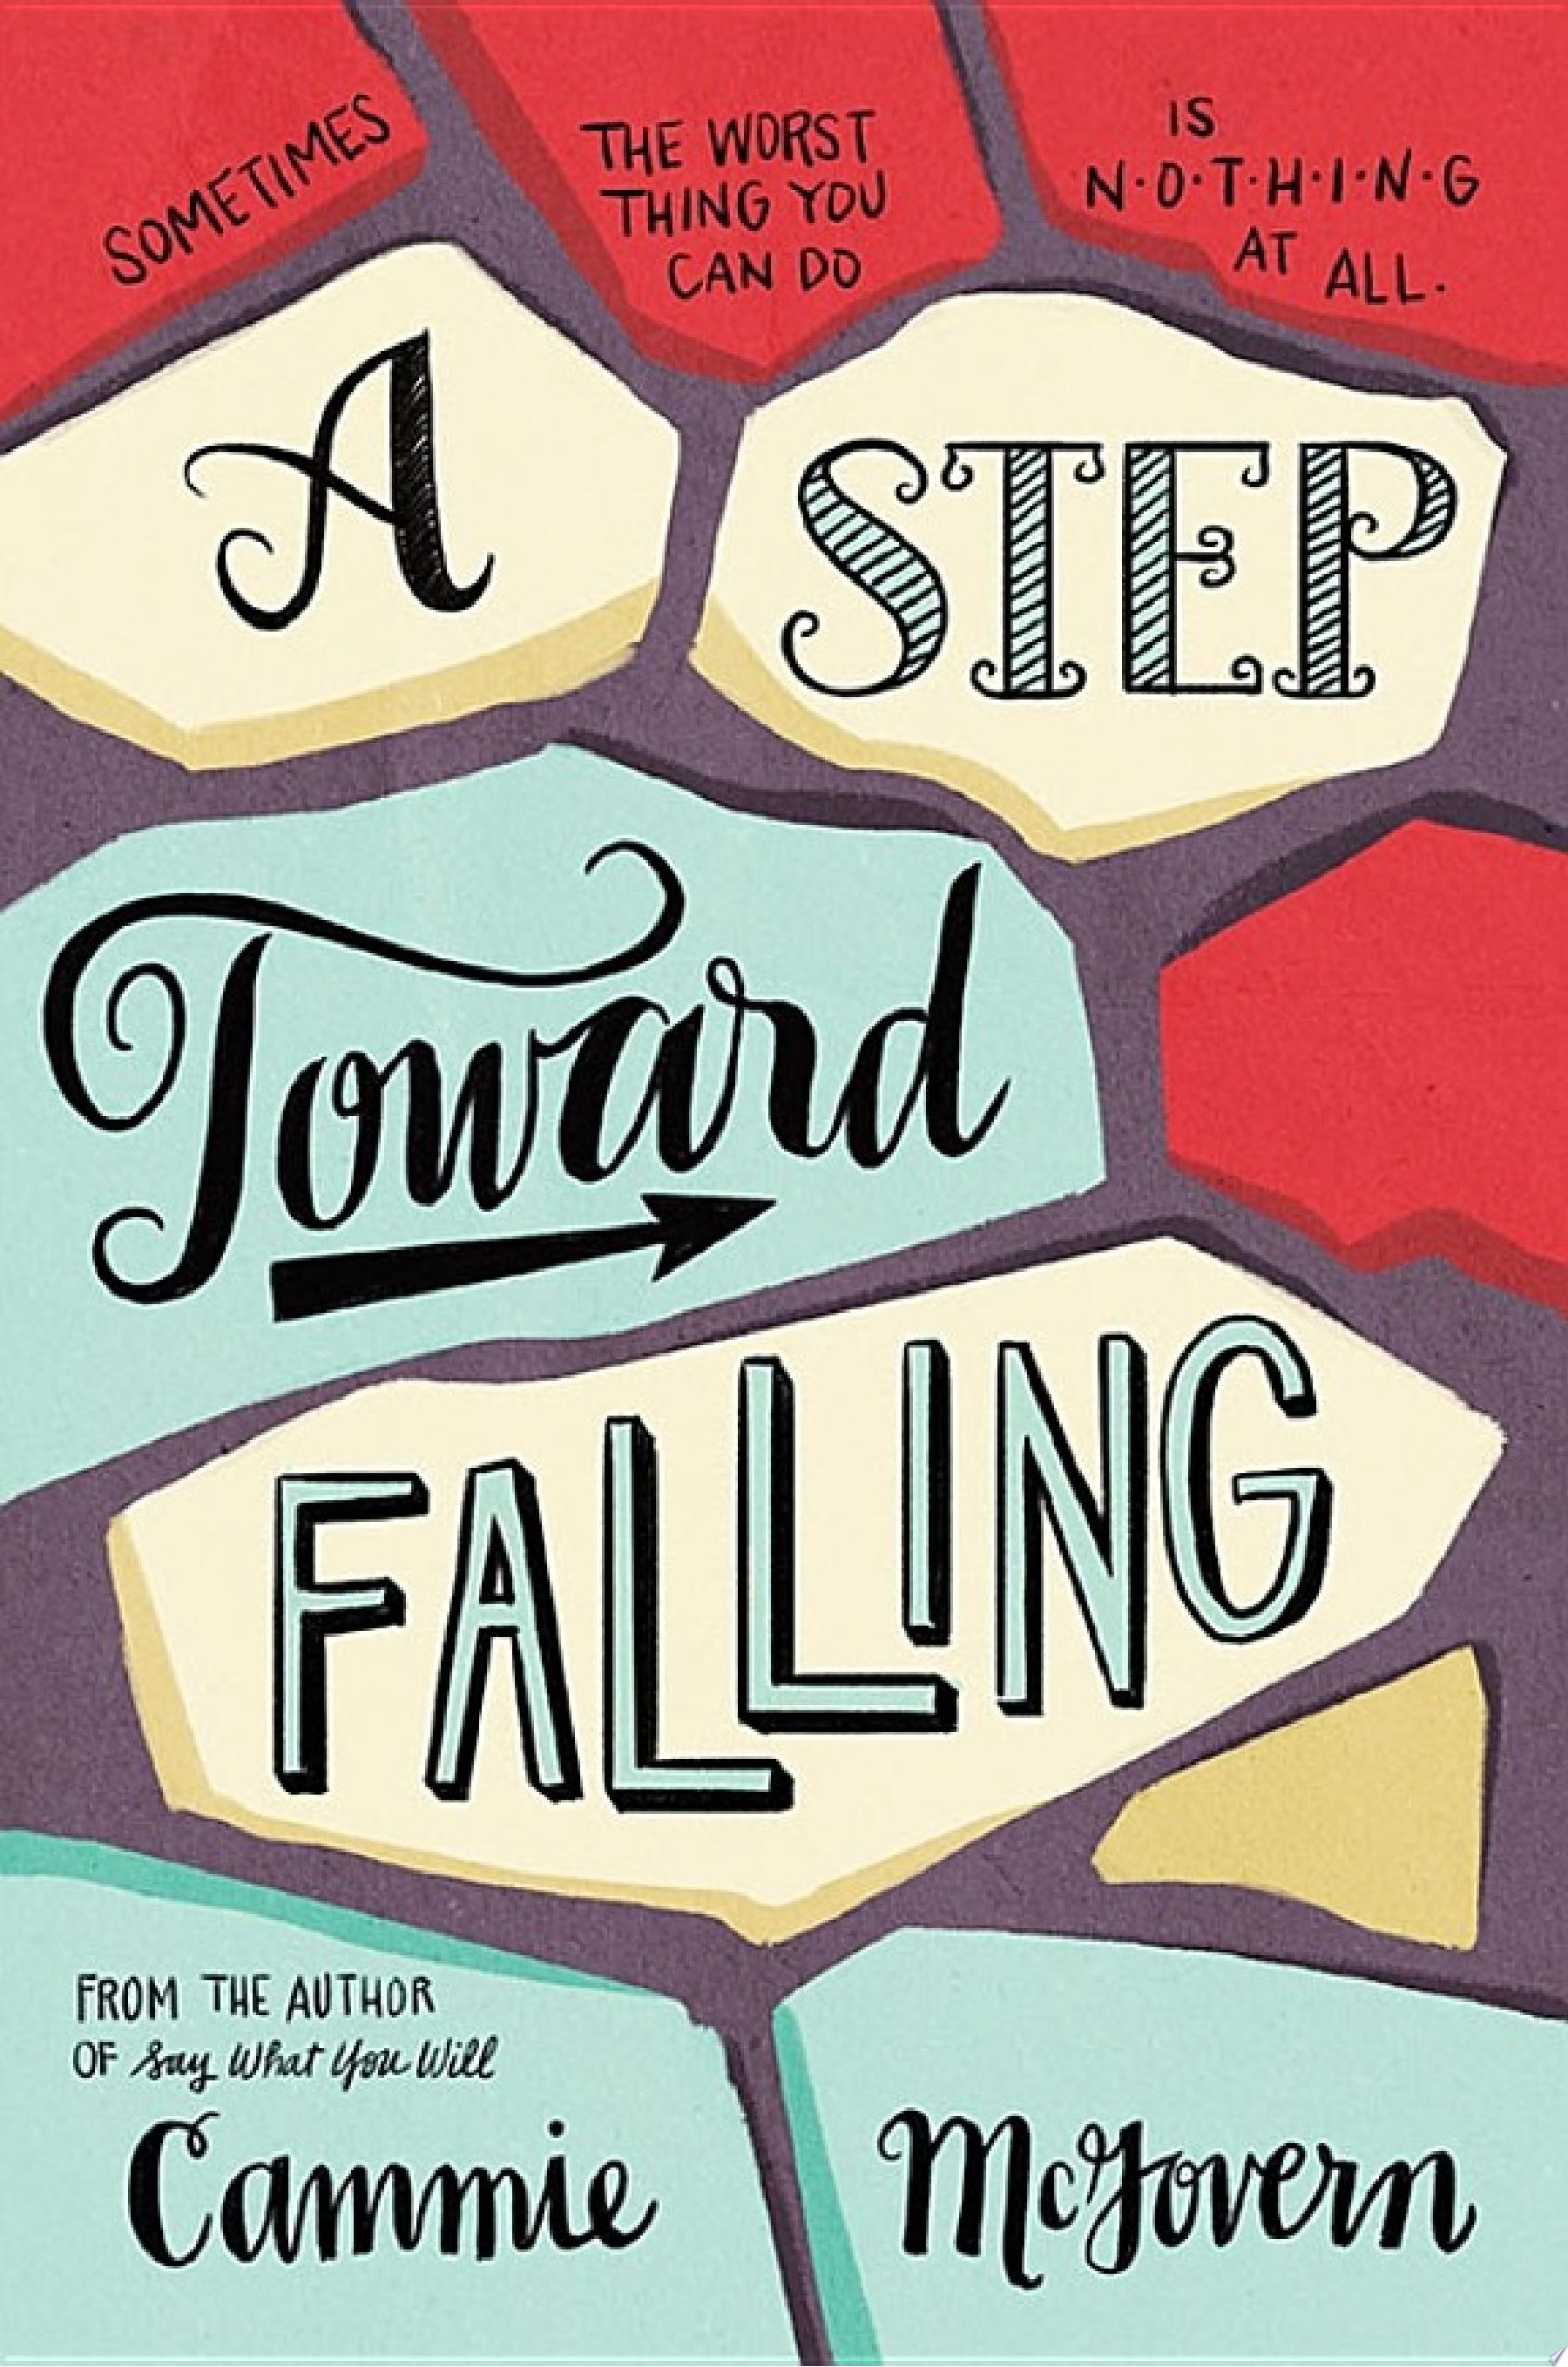 Image for "A Step Toward Falling"